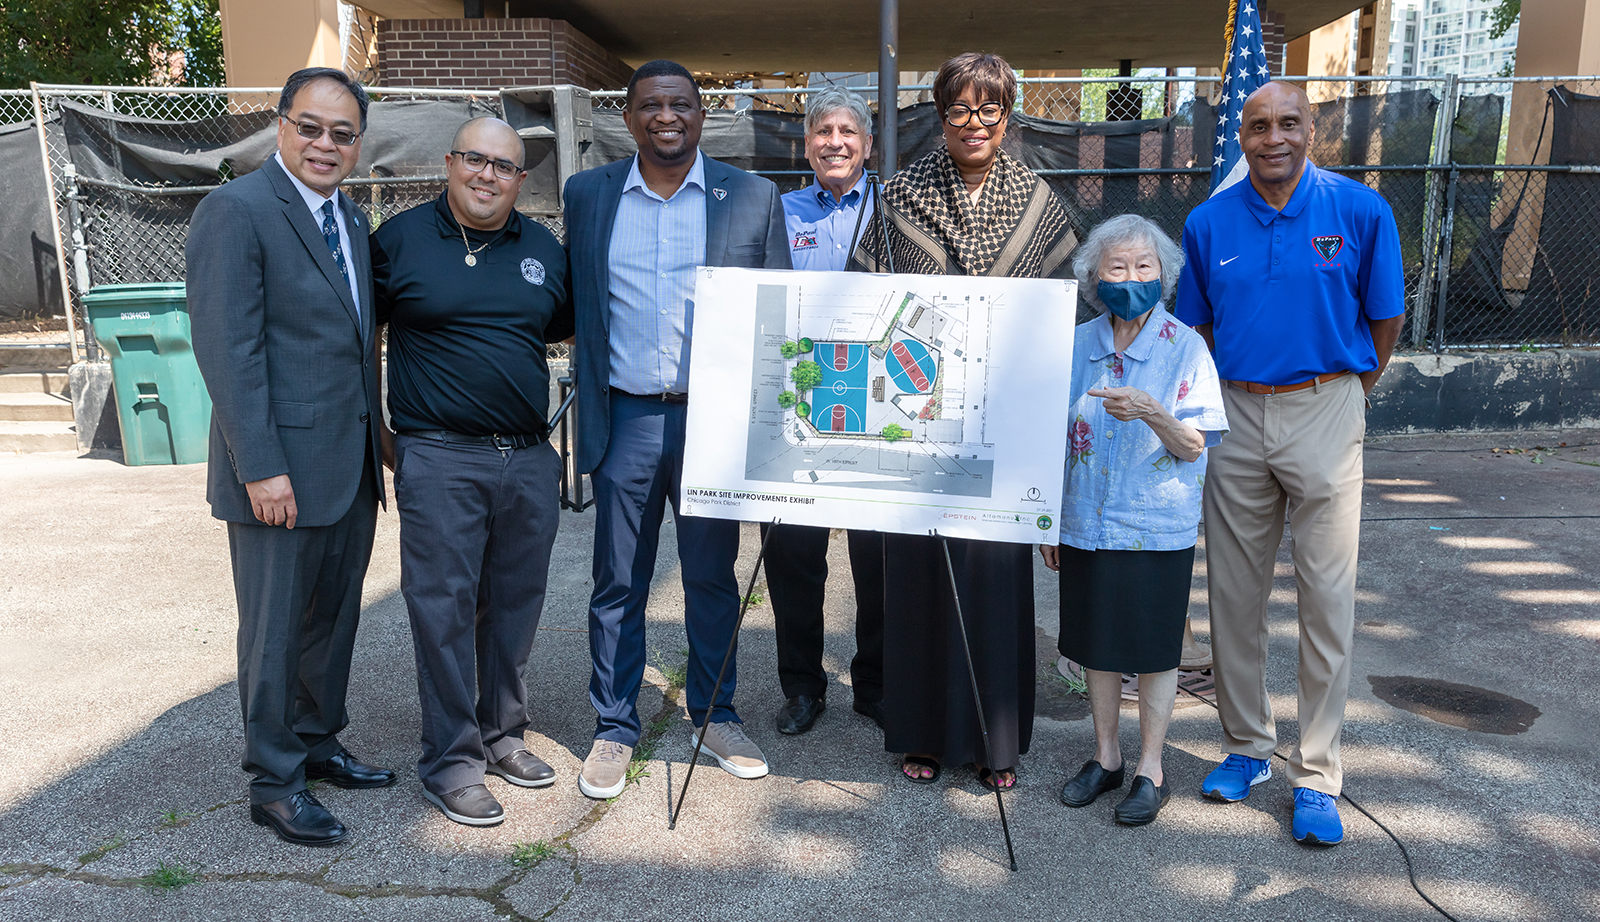 DePaul University, the Chicago Park District and community leaders gathered Aug. 30 to break ground on renovations to a South Loop park: A. Gabriel Esteban, Ph.D., president of DePaul University; Dennis Gonzalez, Chicago Park District area manager; Dewayne Peevy, vice president and director of athletics; head coach Doug Bruno, Alderman Pat Dowell, community member Sylvia Wu and head coach Tony Stubblefield attended the event. 